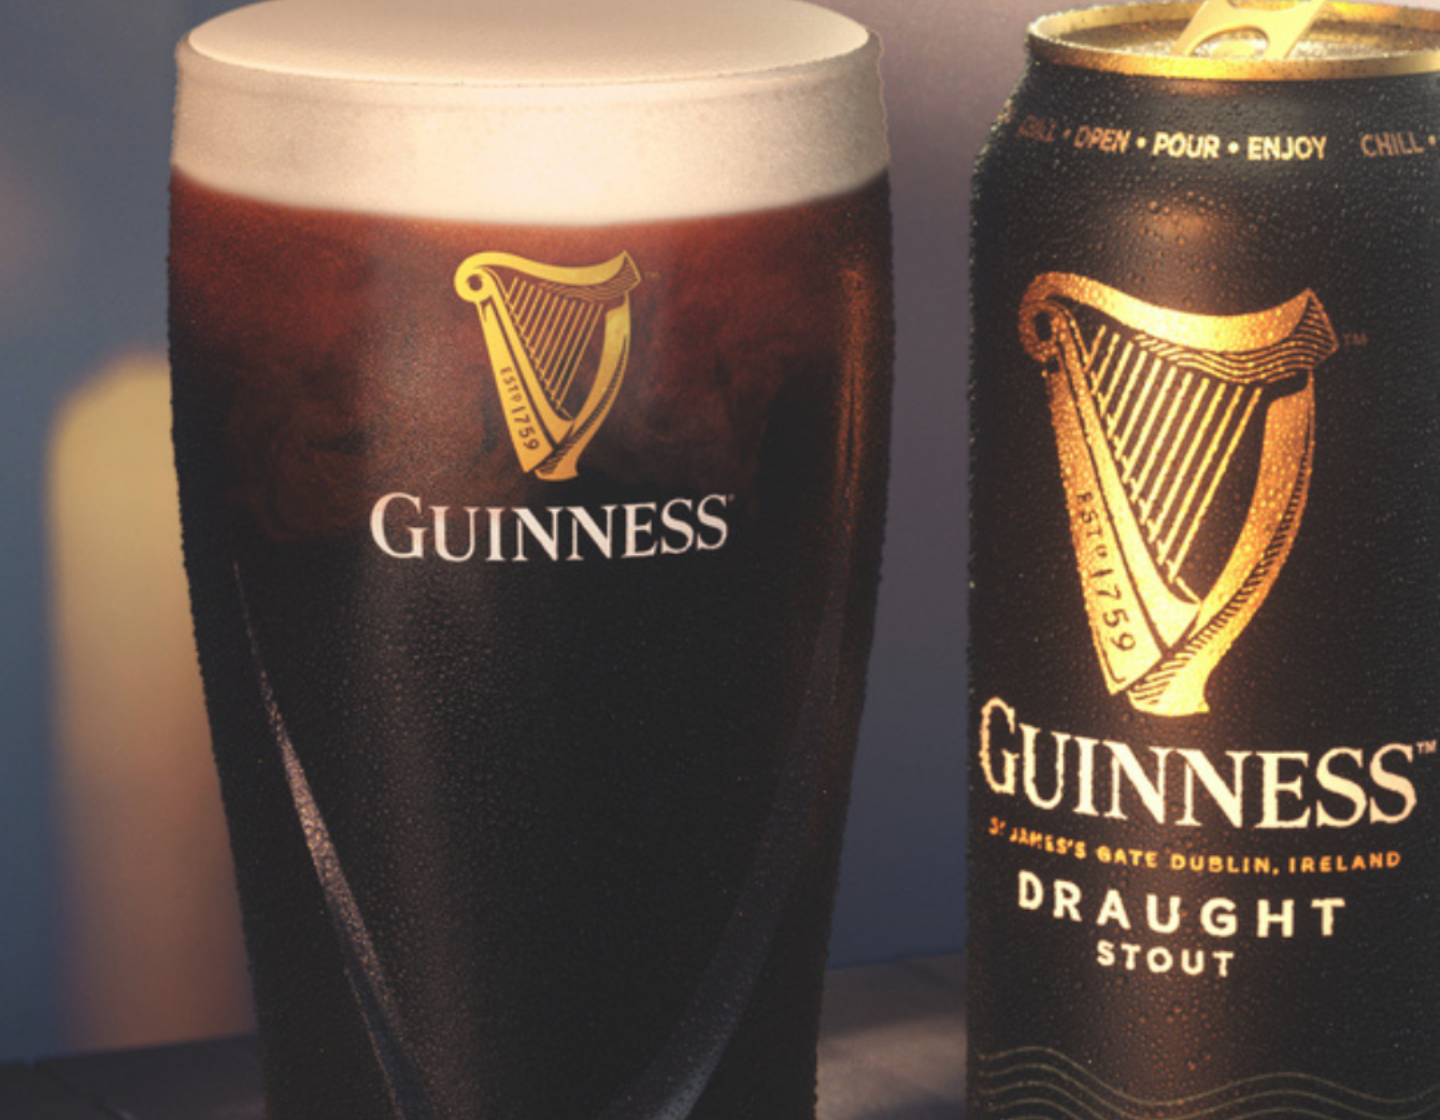 Pint of Guinness Draught in glass beside can of Guinness Draught Stout 